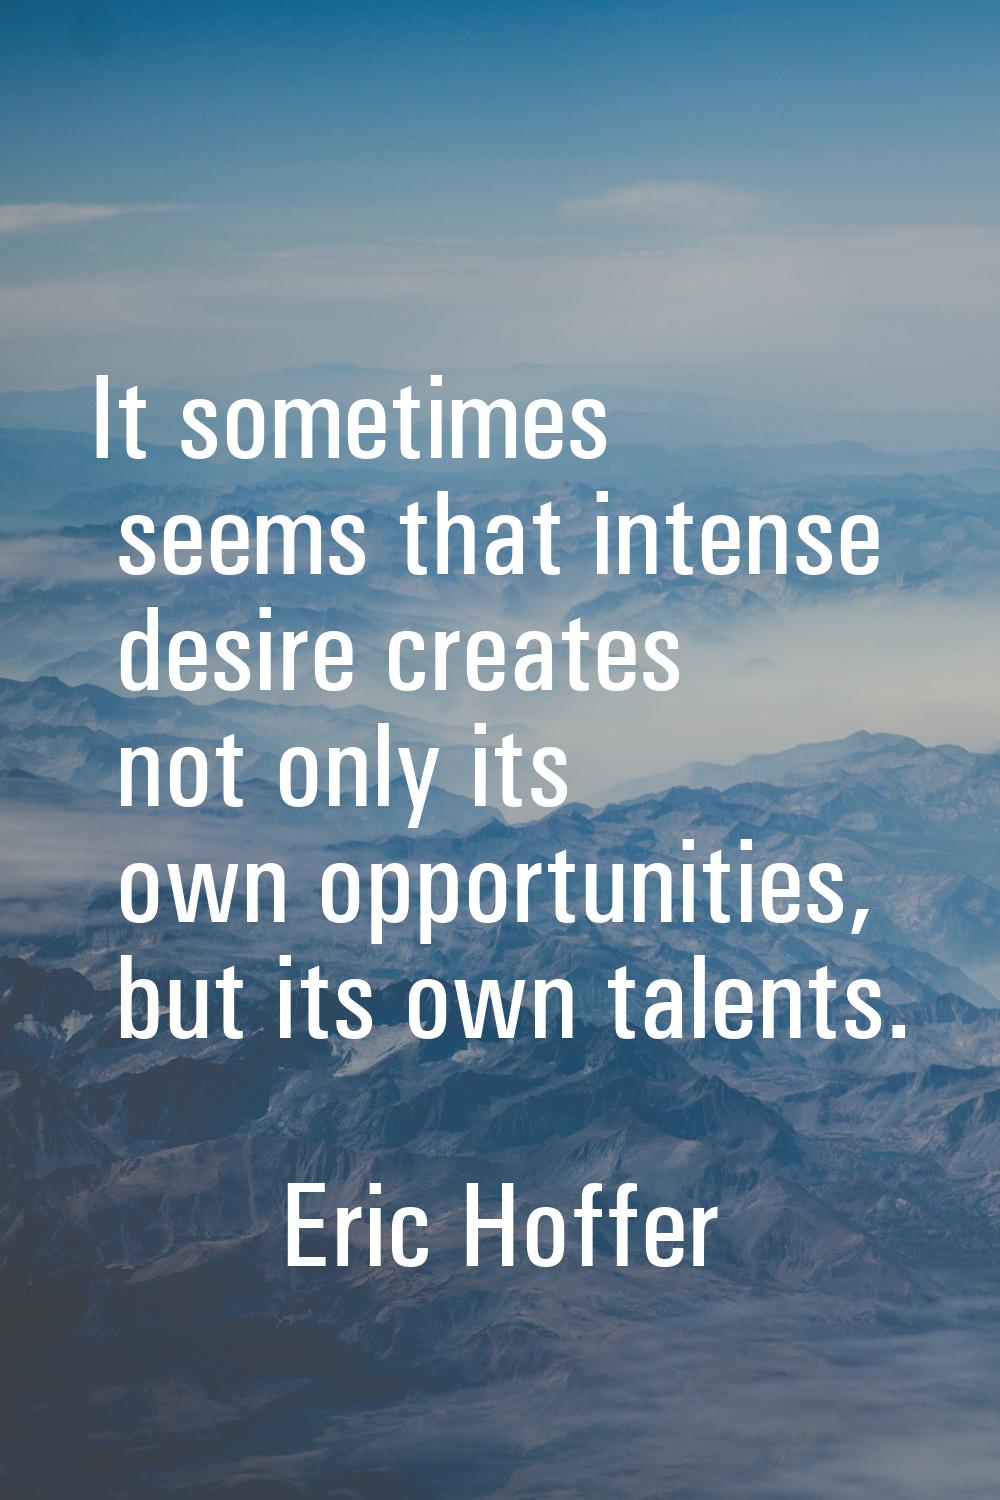 It sometimes seems that intense desire creates not only its own opportunities, but its own talents.